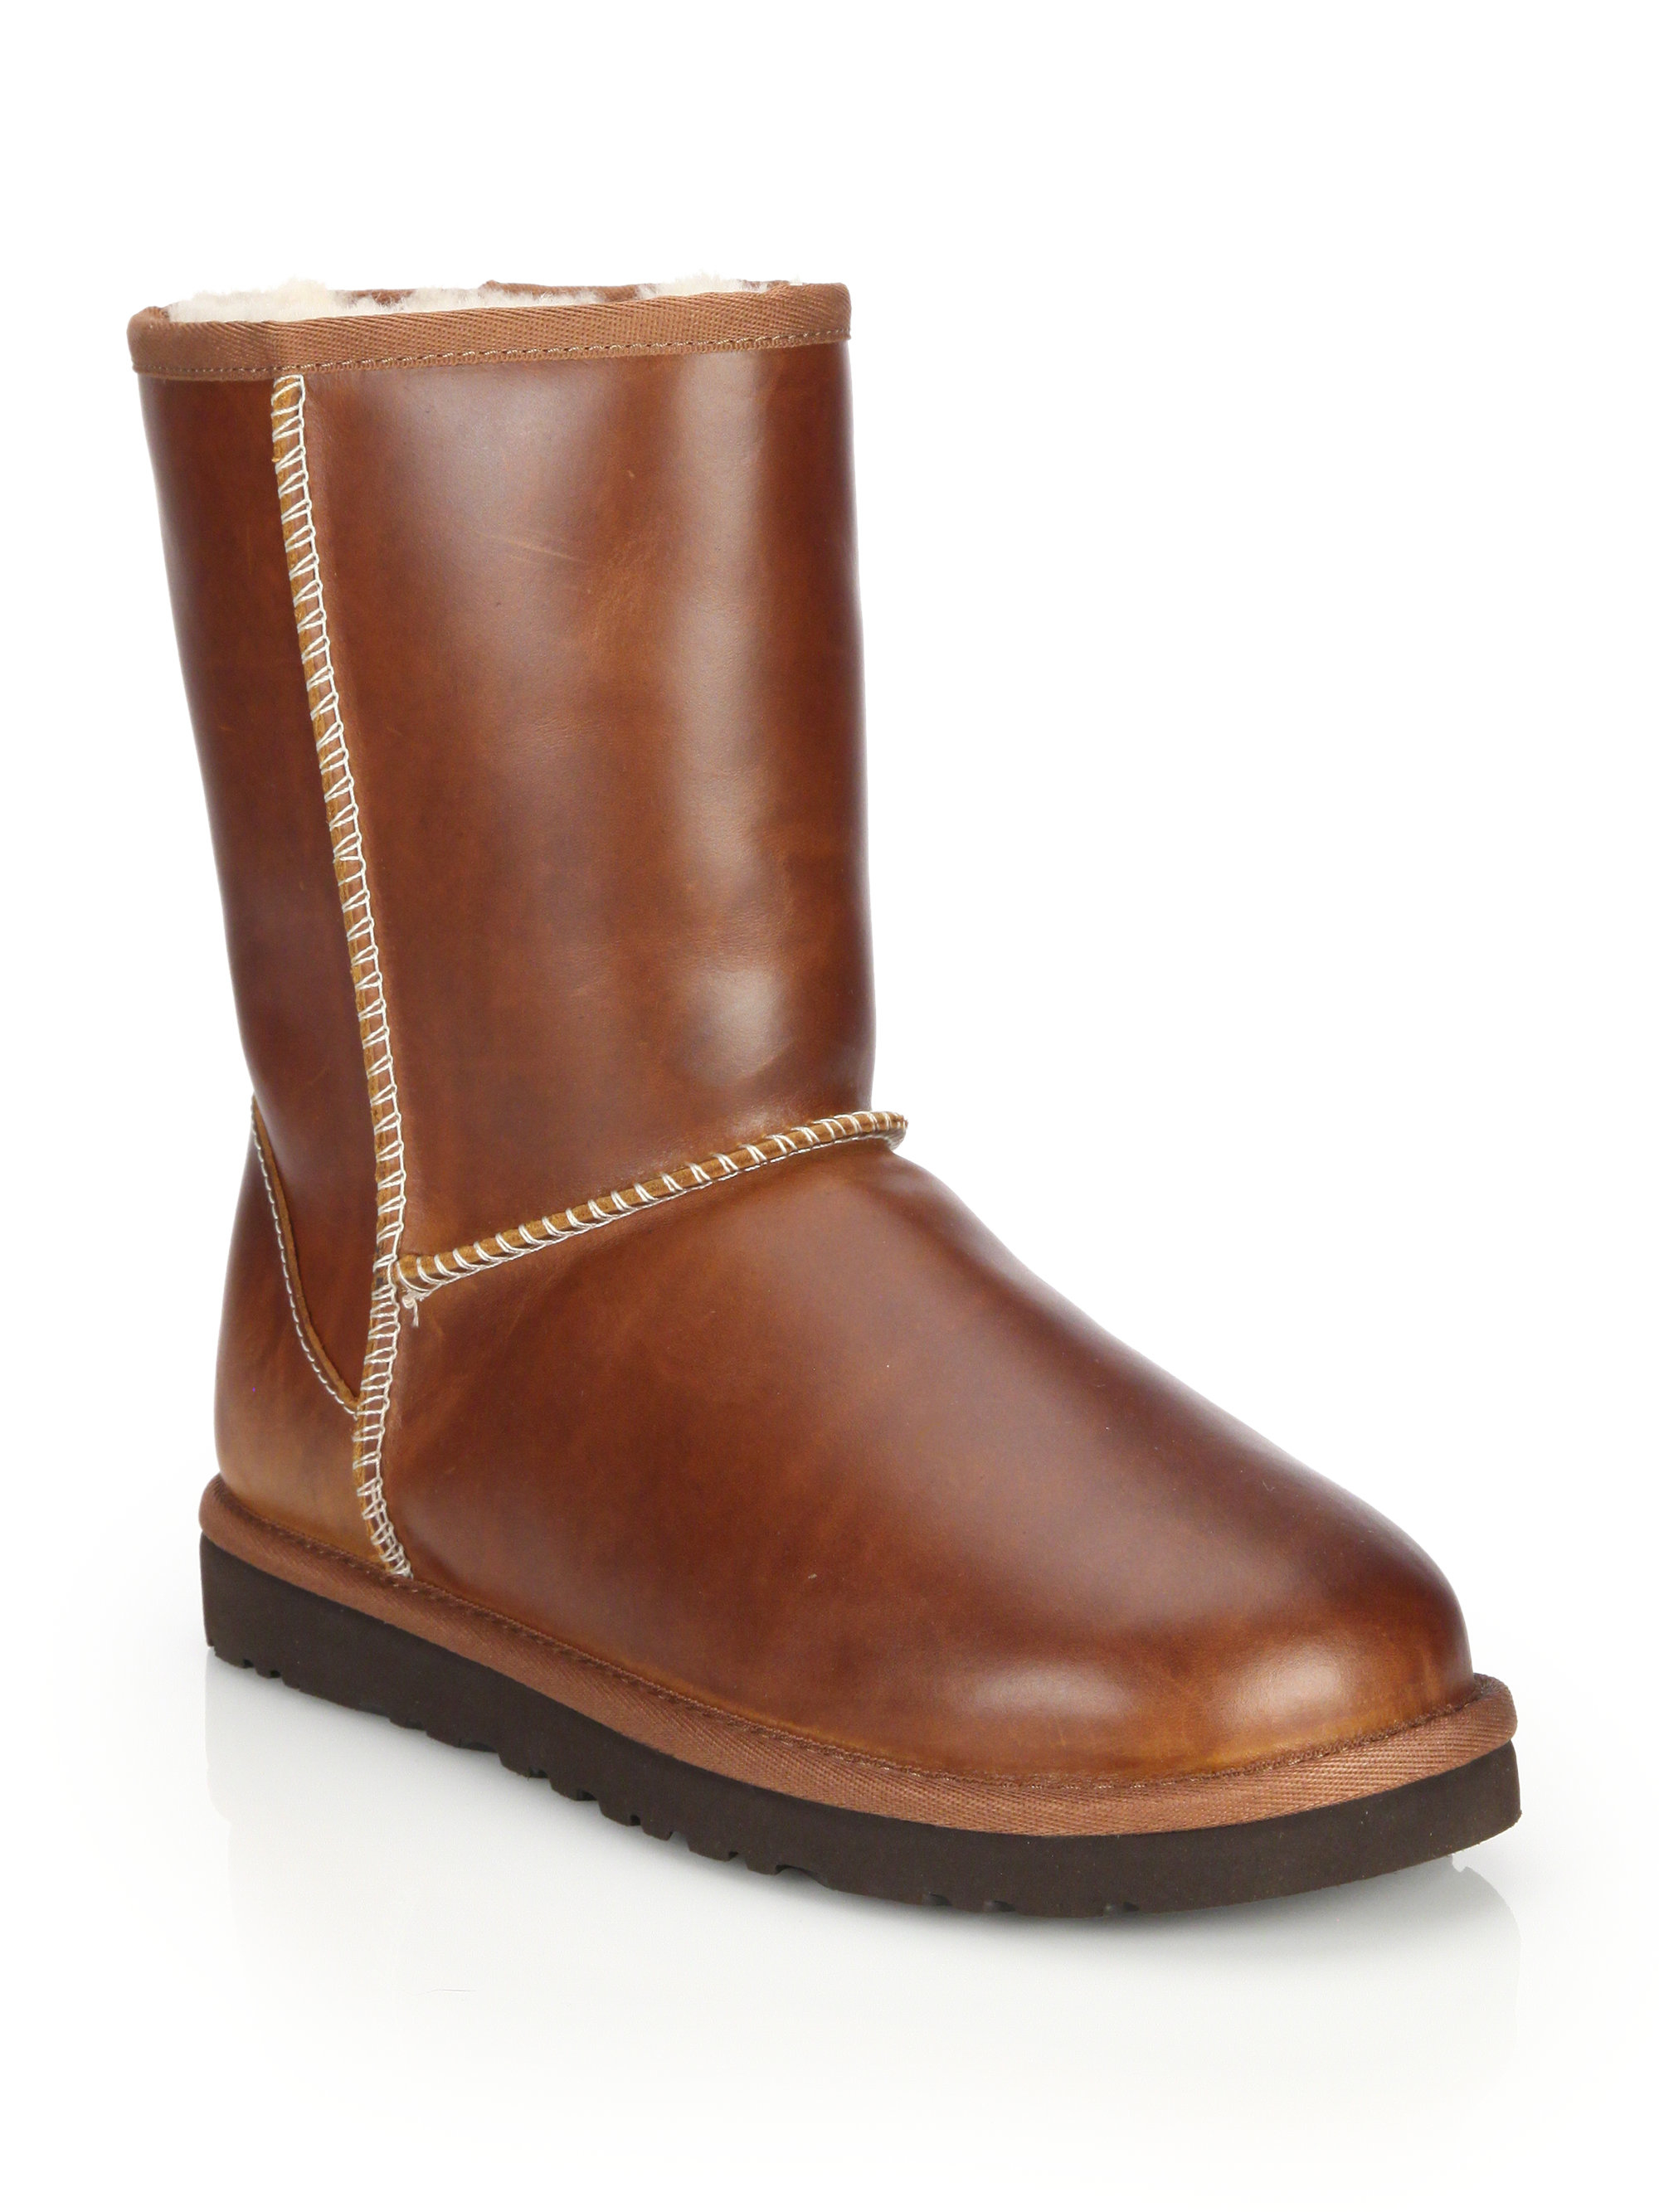 Ugg Classic Short Leather & Pure Boots in Brown (chestnut) | Lyst